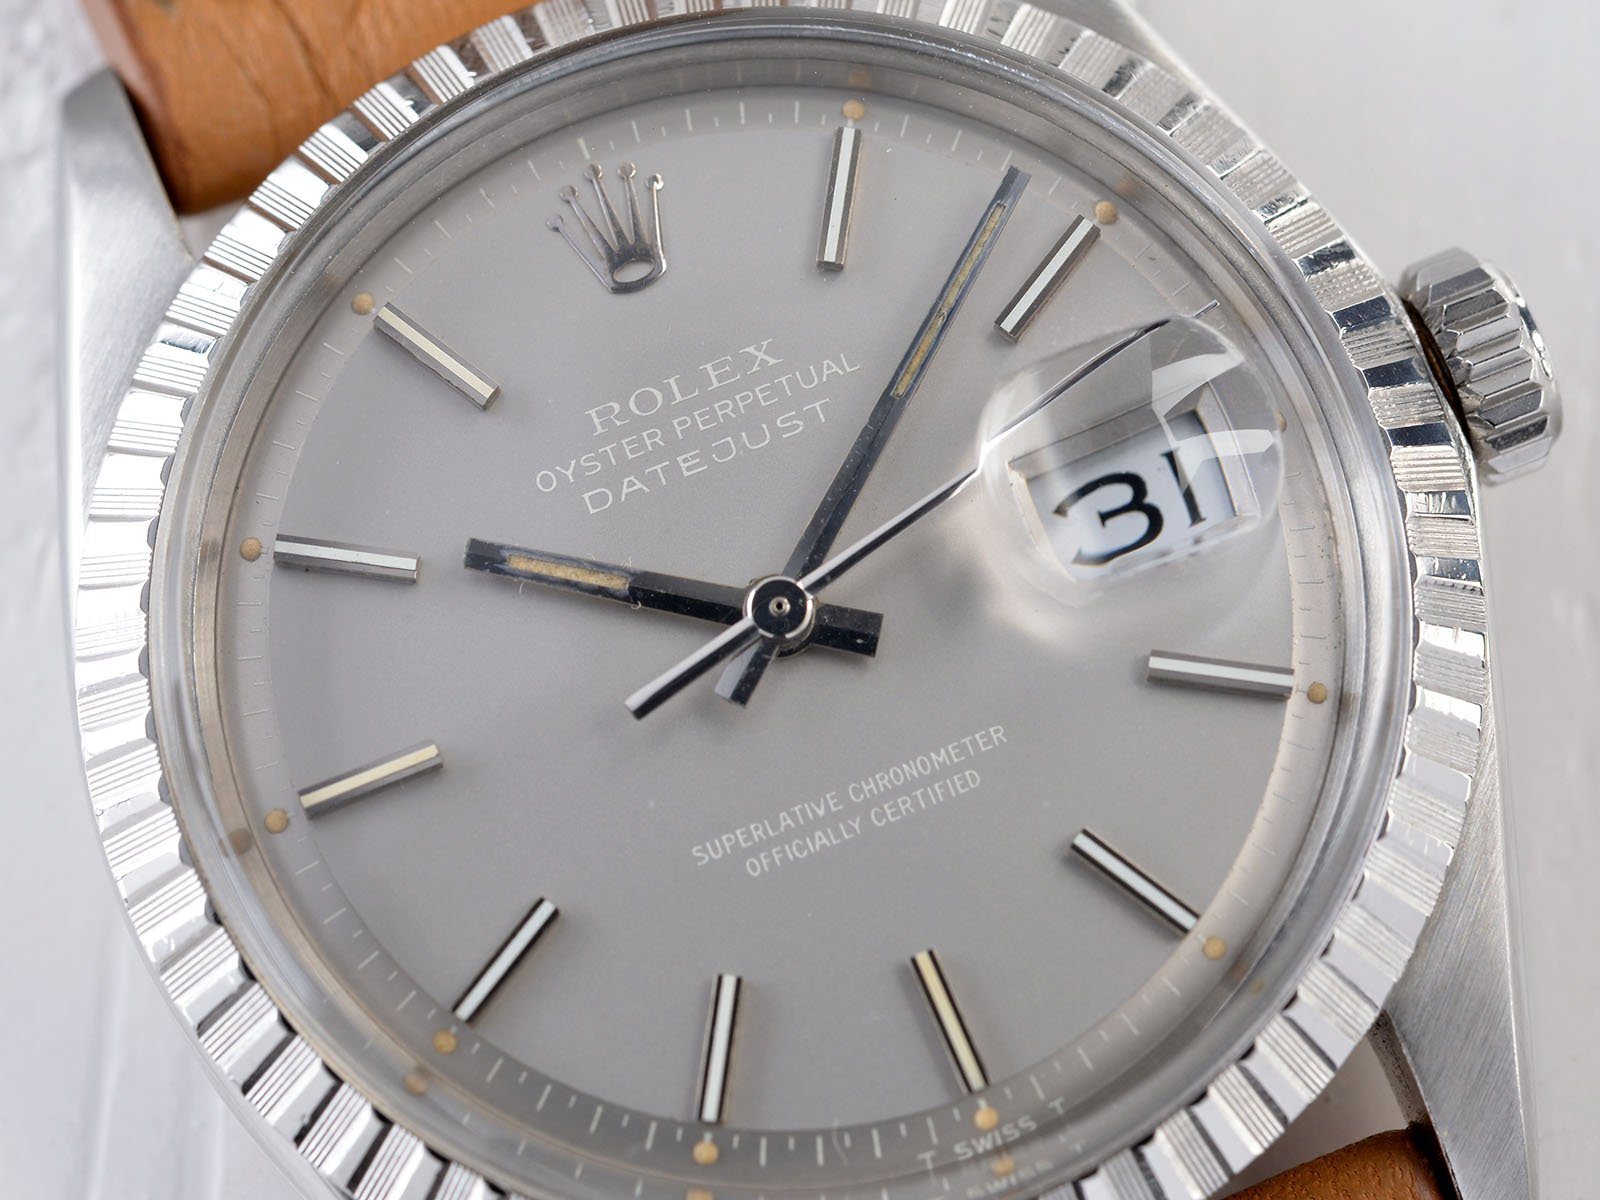 ROLEX 1603 DATEJUST GREY DIAL + PAPERS